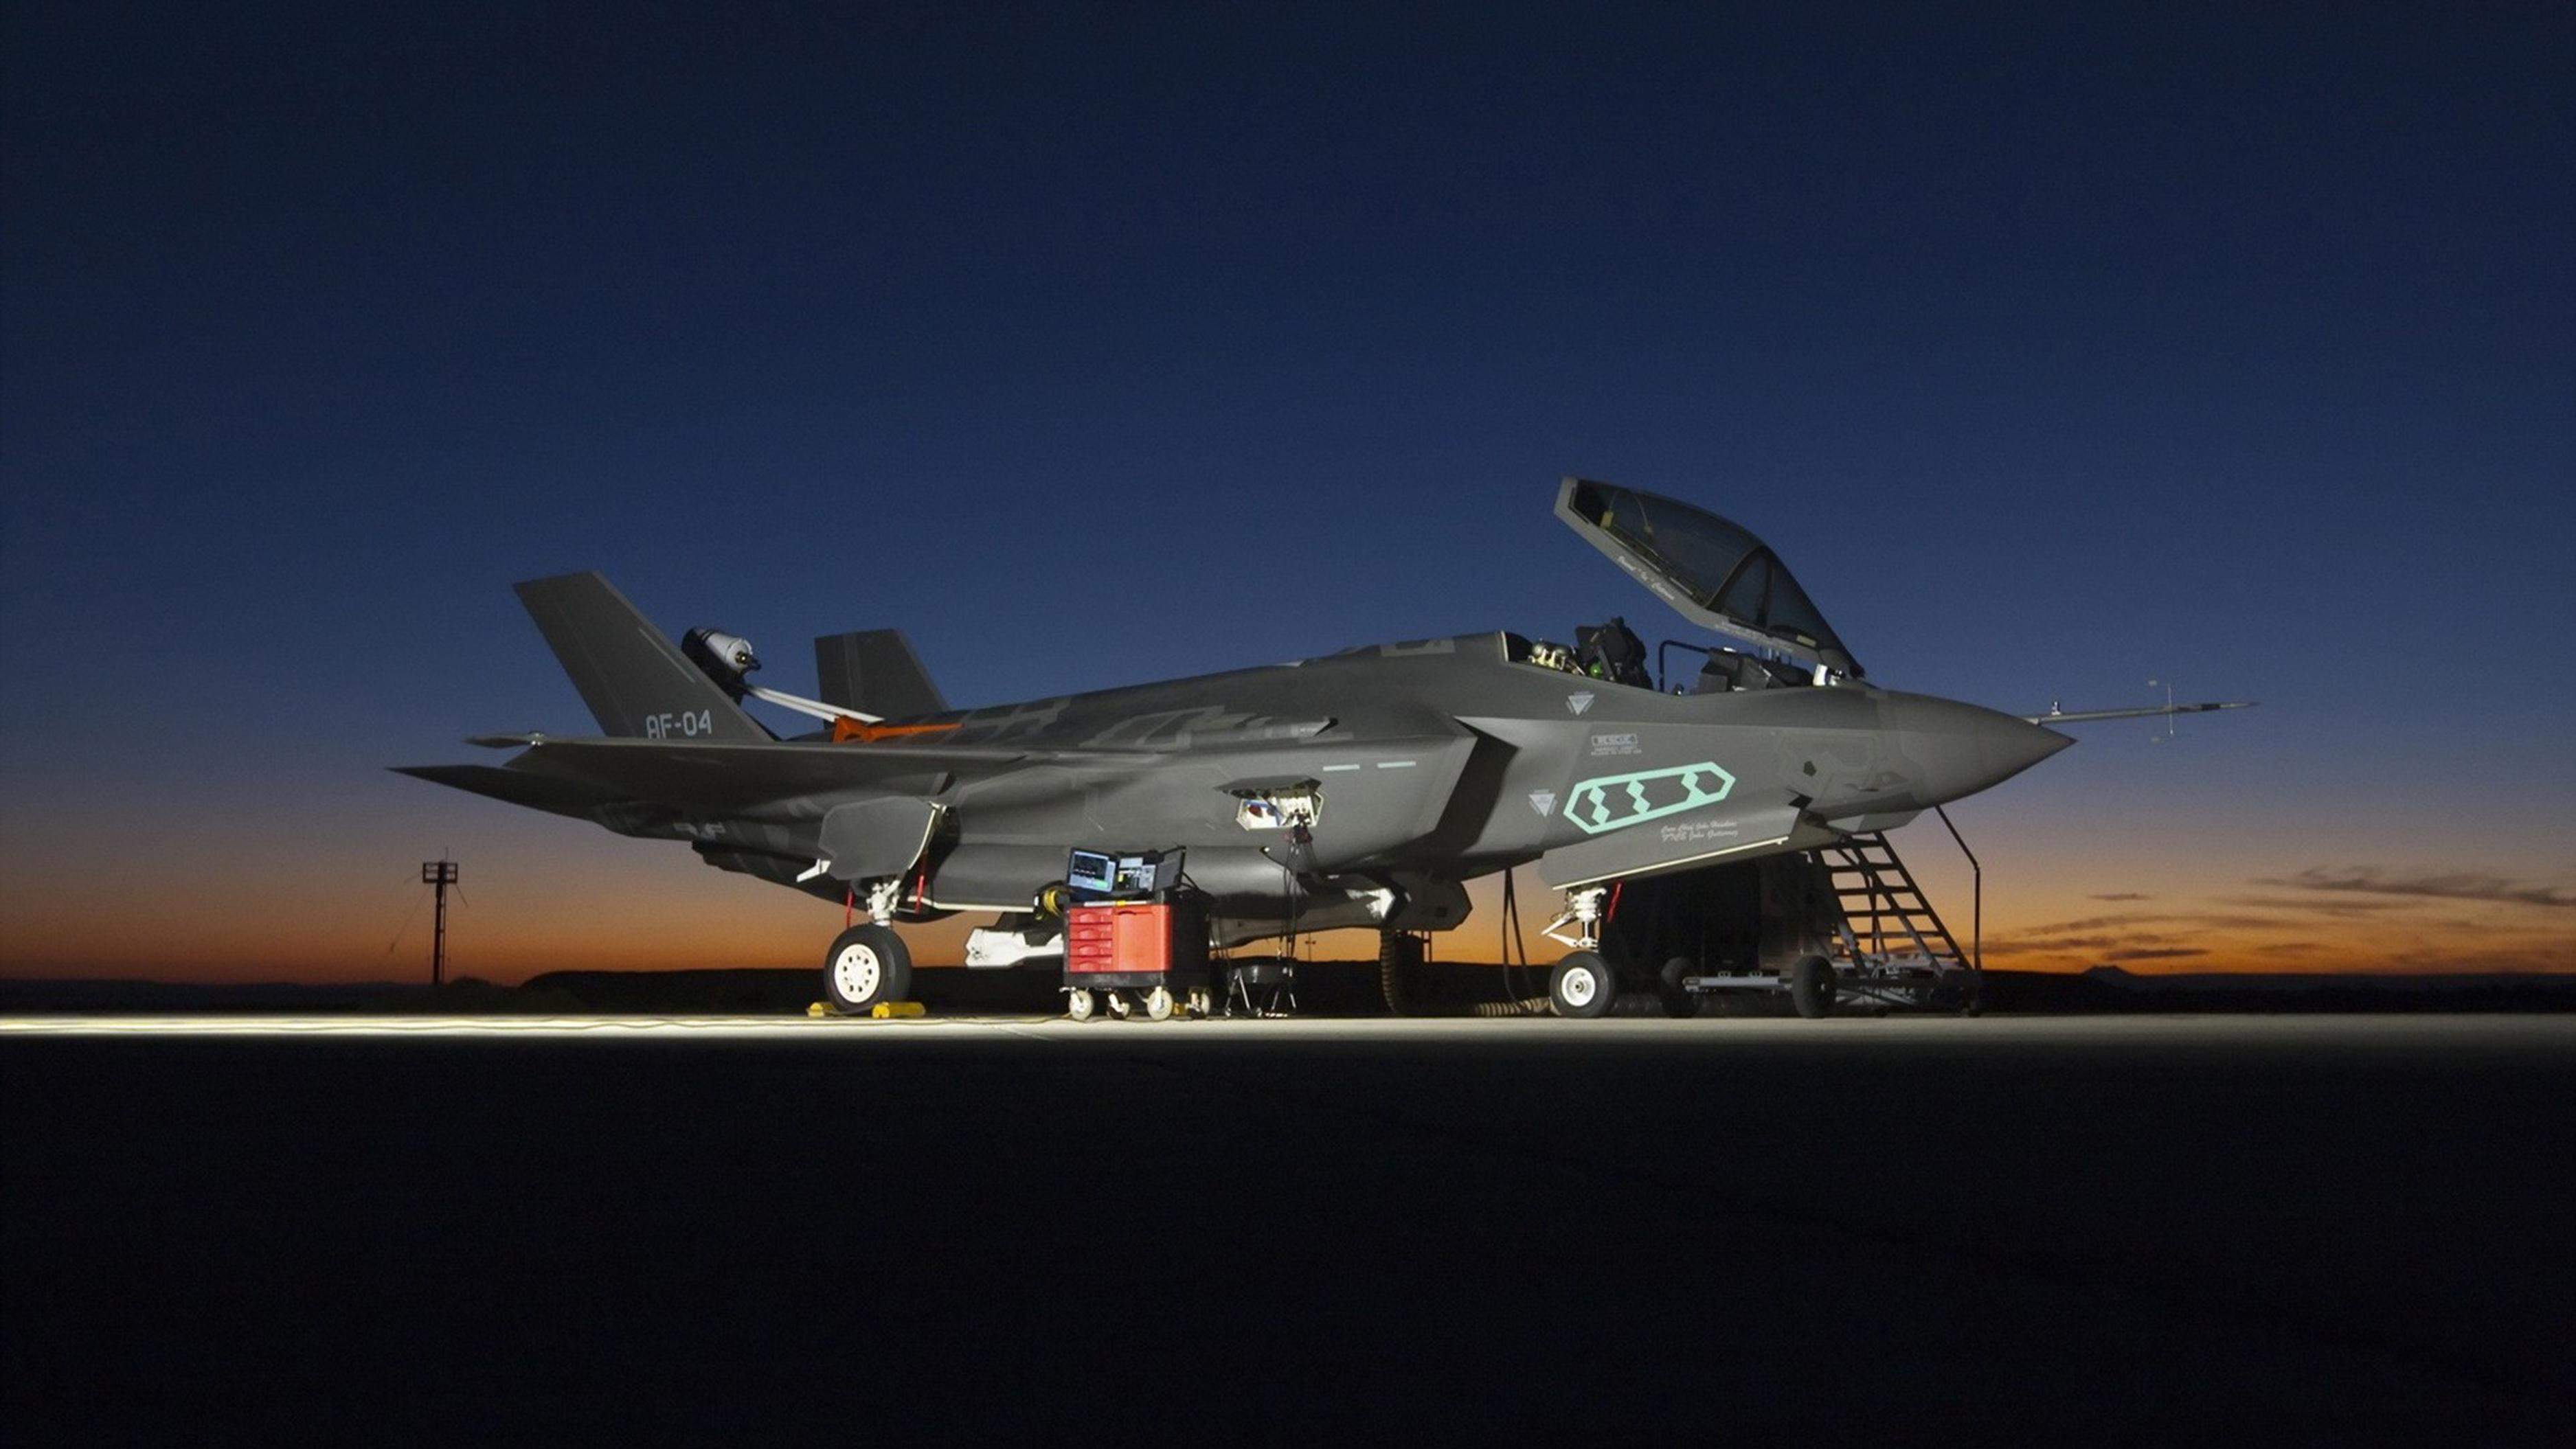 F-35 Joint Strike Fighter aircraft on runway at night